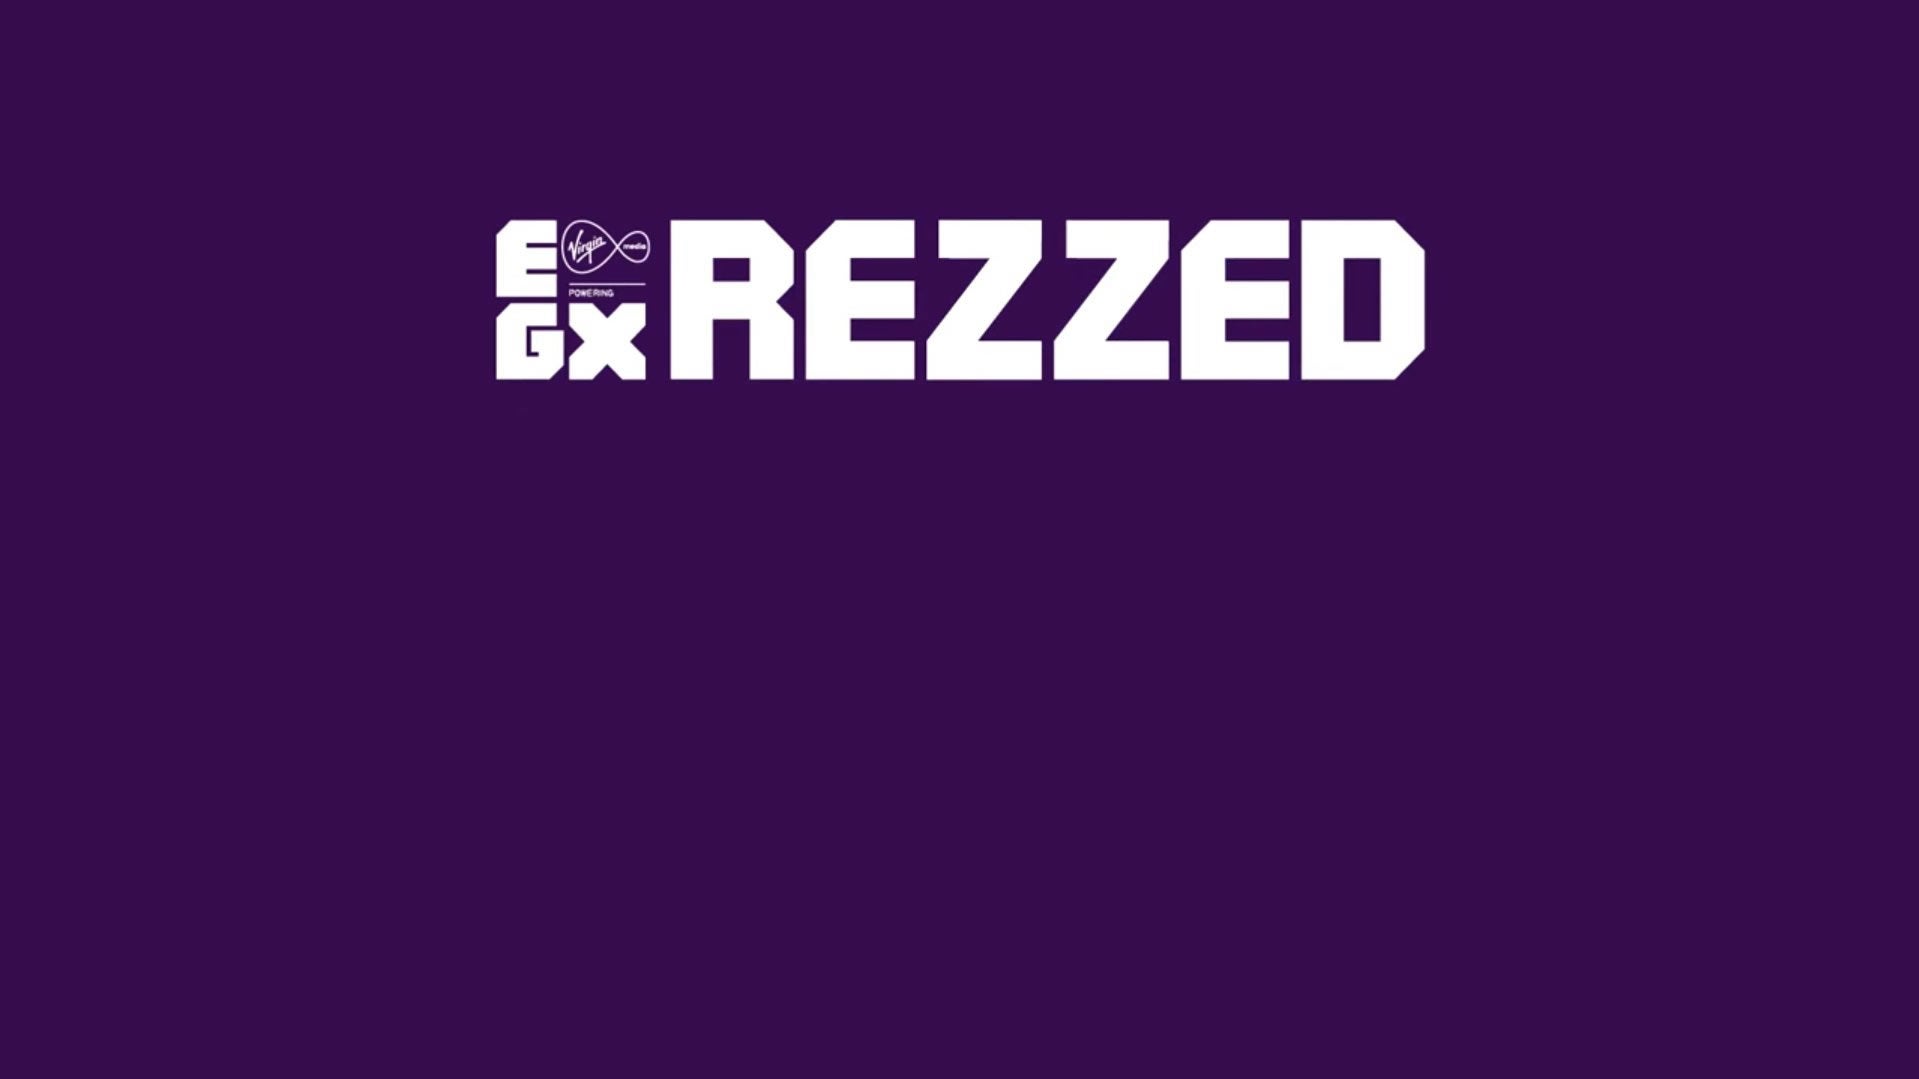 Image for EGX Rezzed 2020 moved to July due to coronavirus